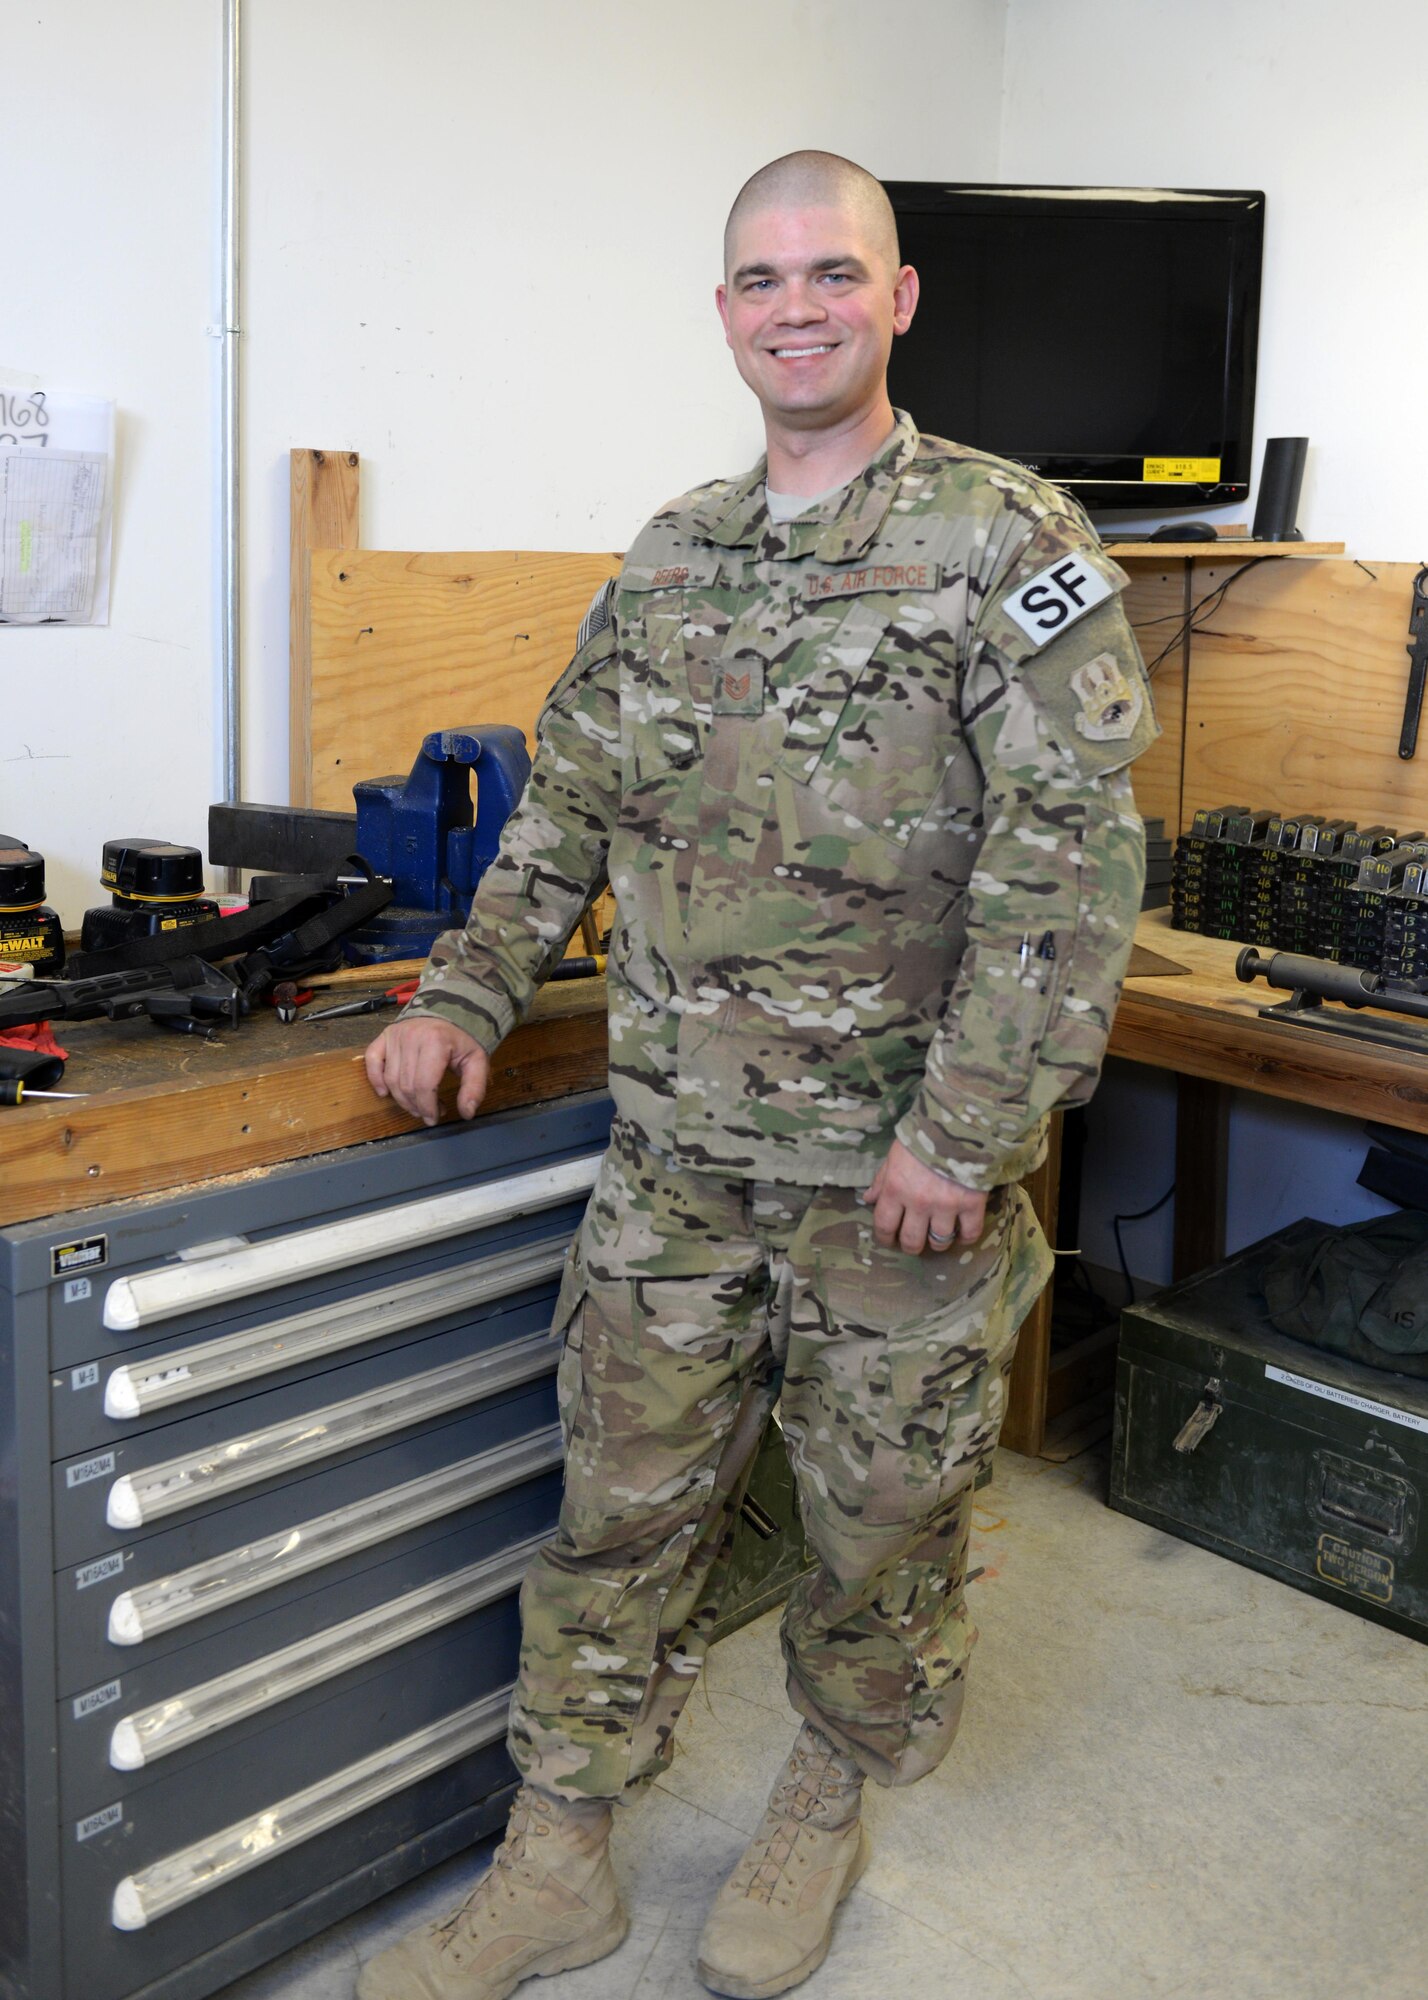 U.S. Air Force TSgt. Kevin Beers, 455th Expeditionary Security Forces Squadron combat arms instructor, poses for a photo Aug. 10, 2015, at Bagram Airfield, Afghanistan. As Bagram’s only weapons repairman, Beers is responsible for repairing weapons for the security forces squadron, logistics readiness squadron, Marines and all other units here. (U.S. Air Force photo by Senior Airman Cierra Presentado/Released)